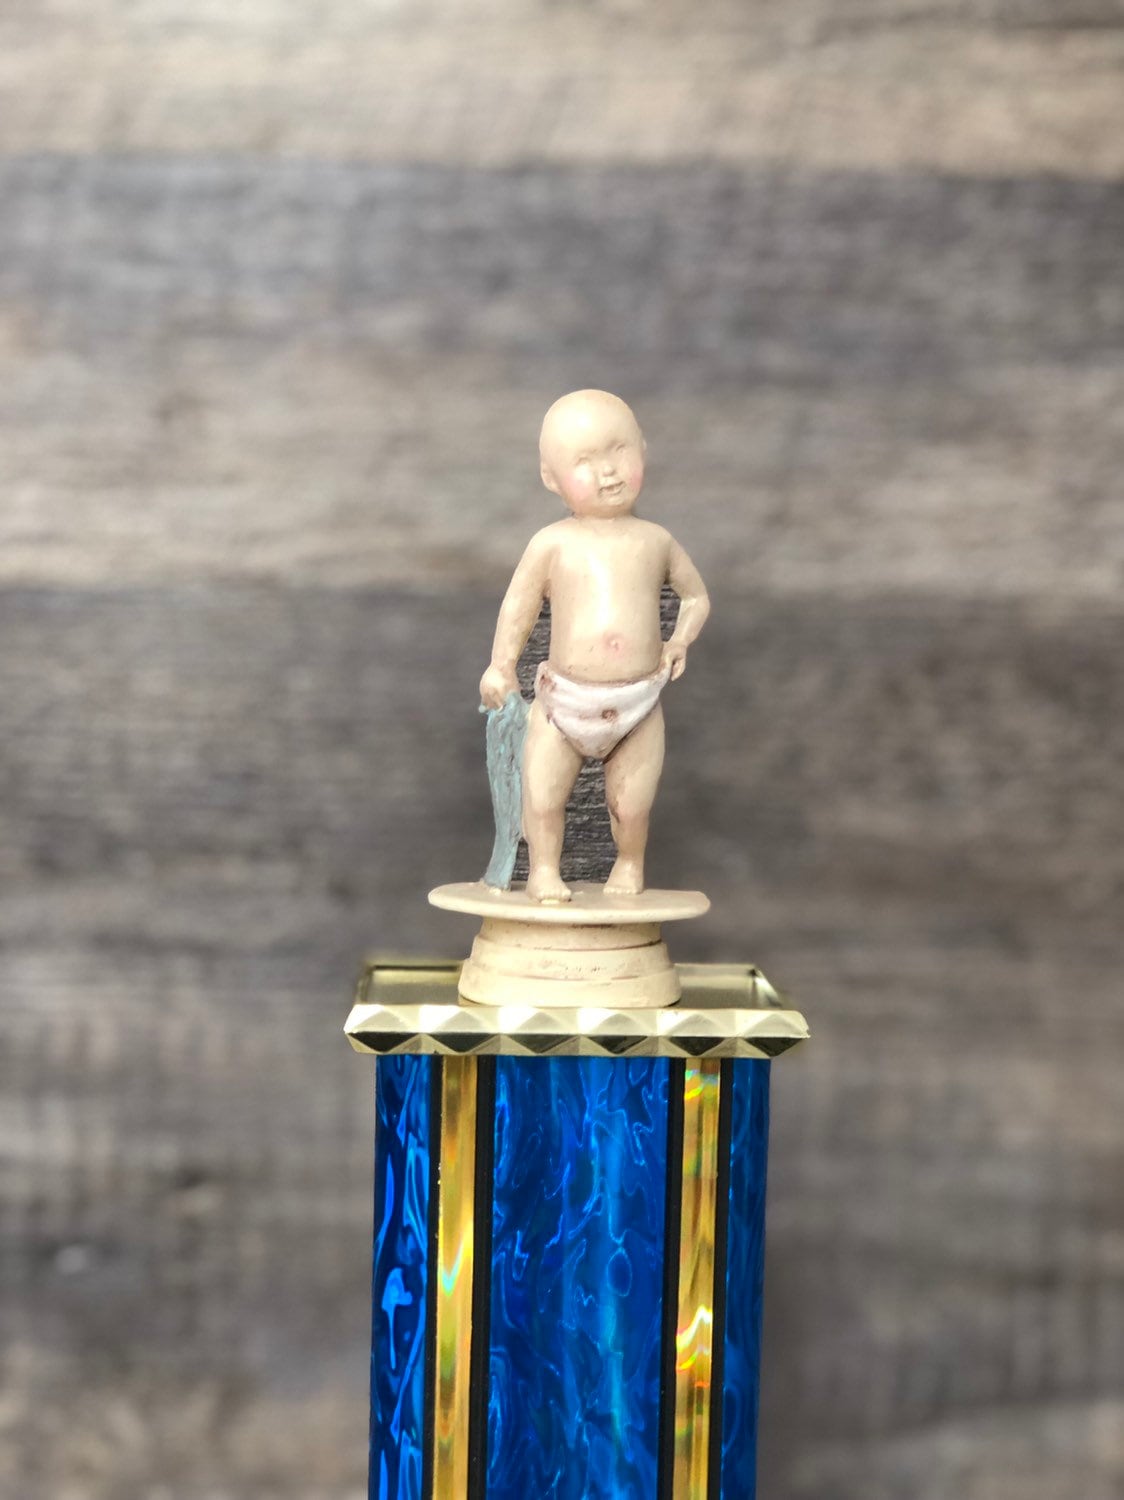 Funny Trophy Biggest Cry Baby Award Quitter Sore Loser Crybaby Fantasy Football League LOSER Trophy FFL Last Place Fantasy Funny Award